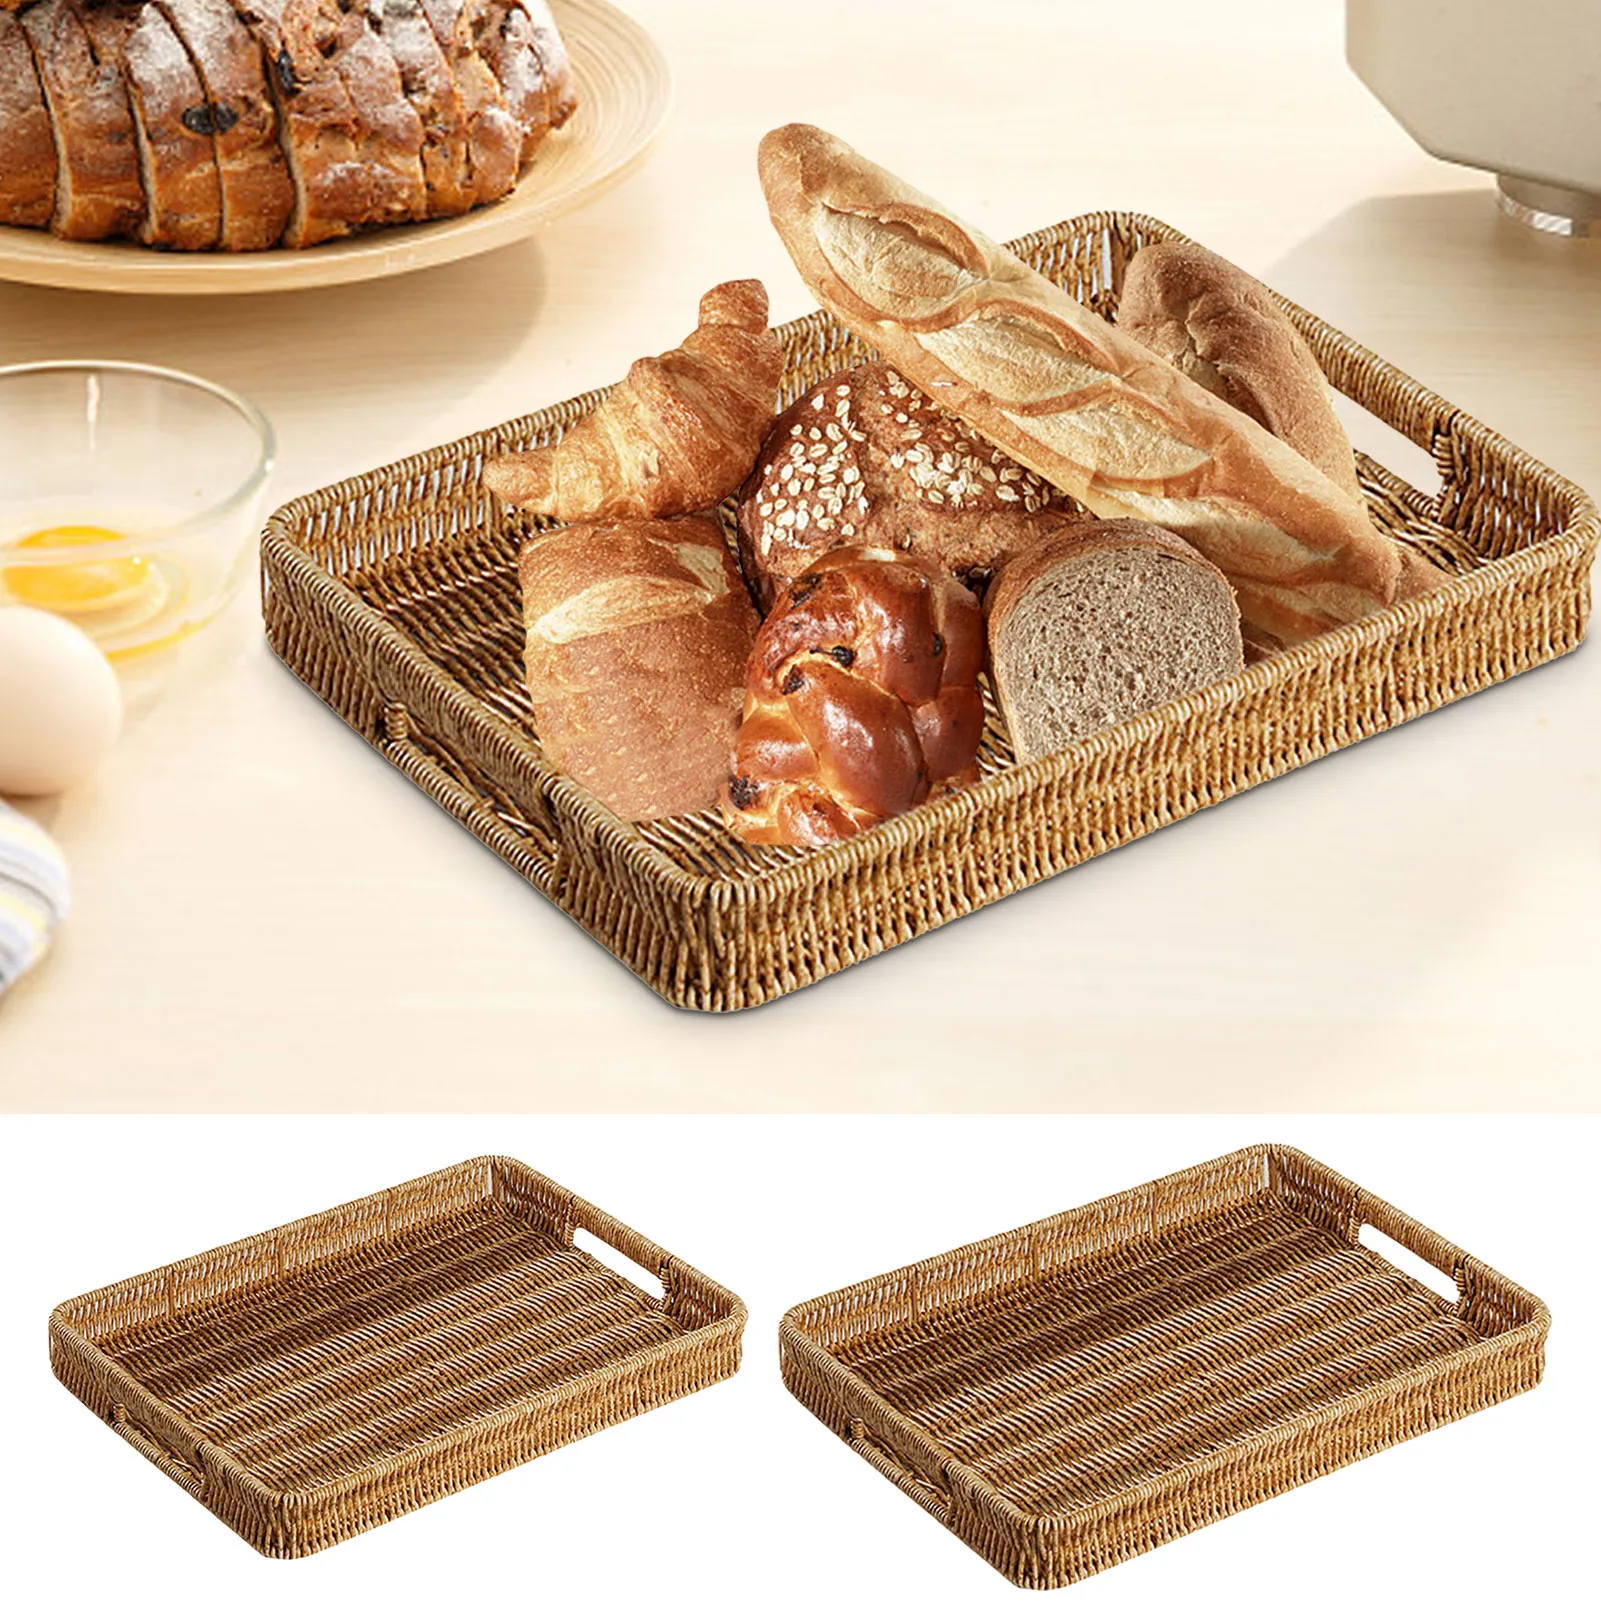 Rattan Tray Rectangular Woven Serving Tray Bathroom Tray Guest Towel Napkin Holder Wicker Decorative Serving Baskets For Bread